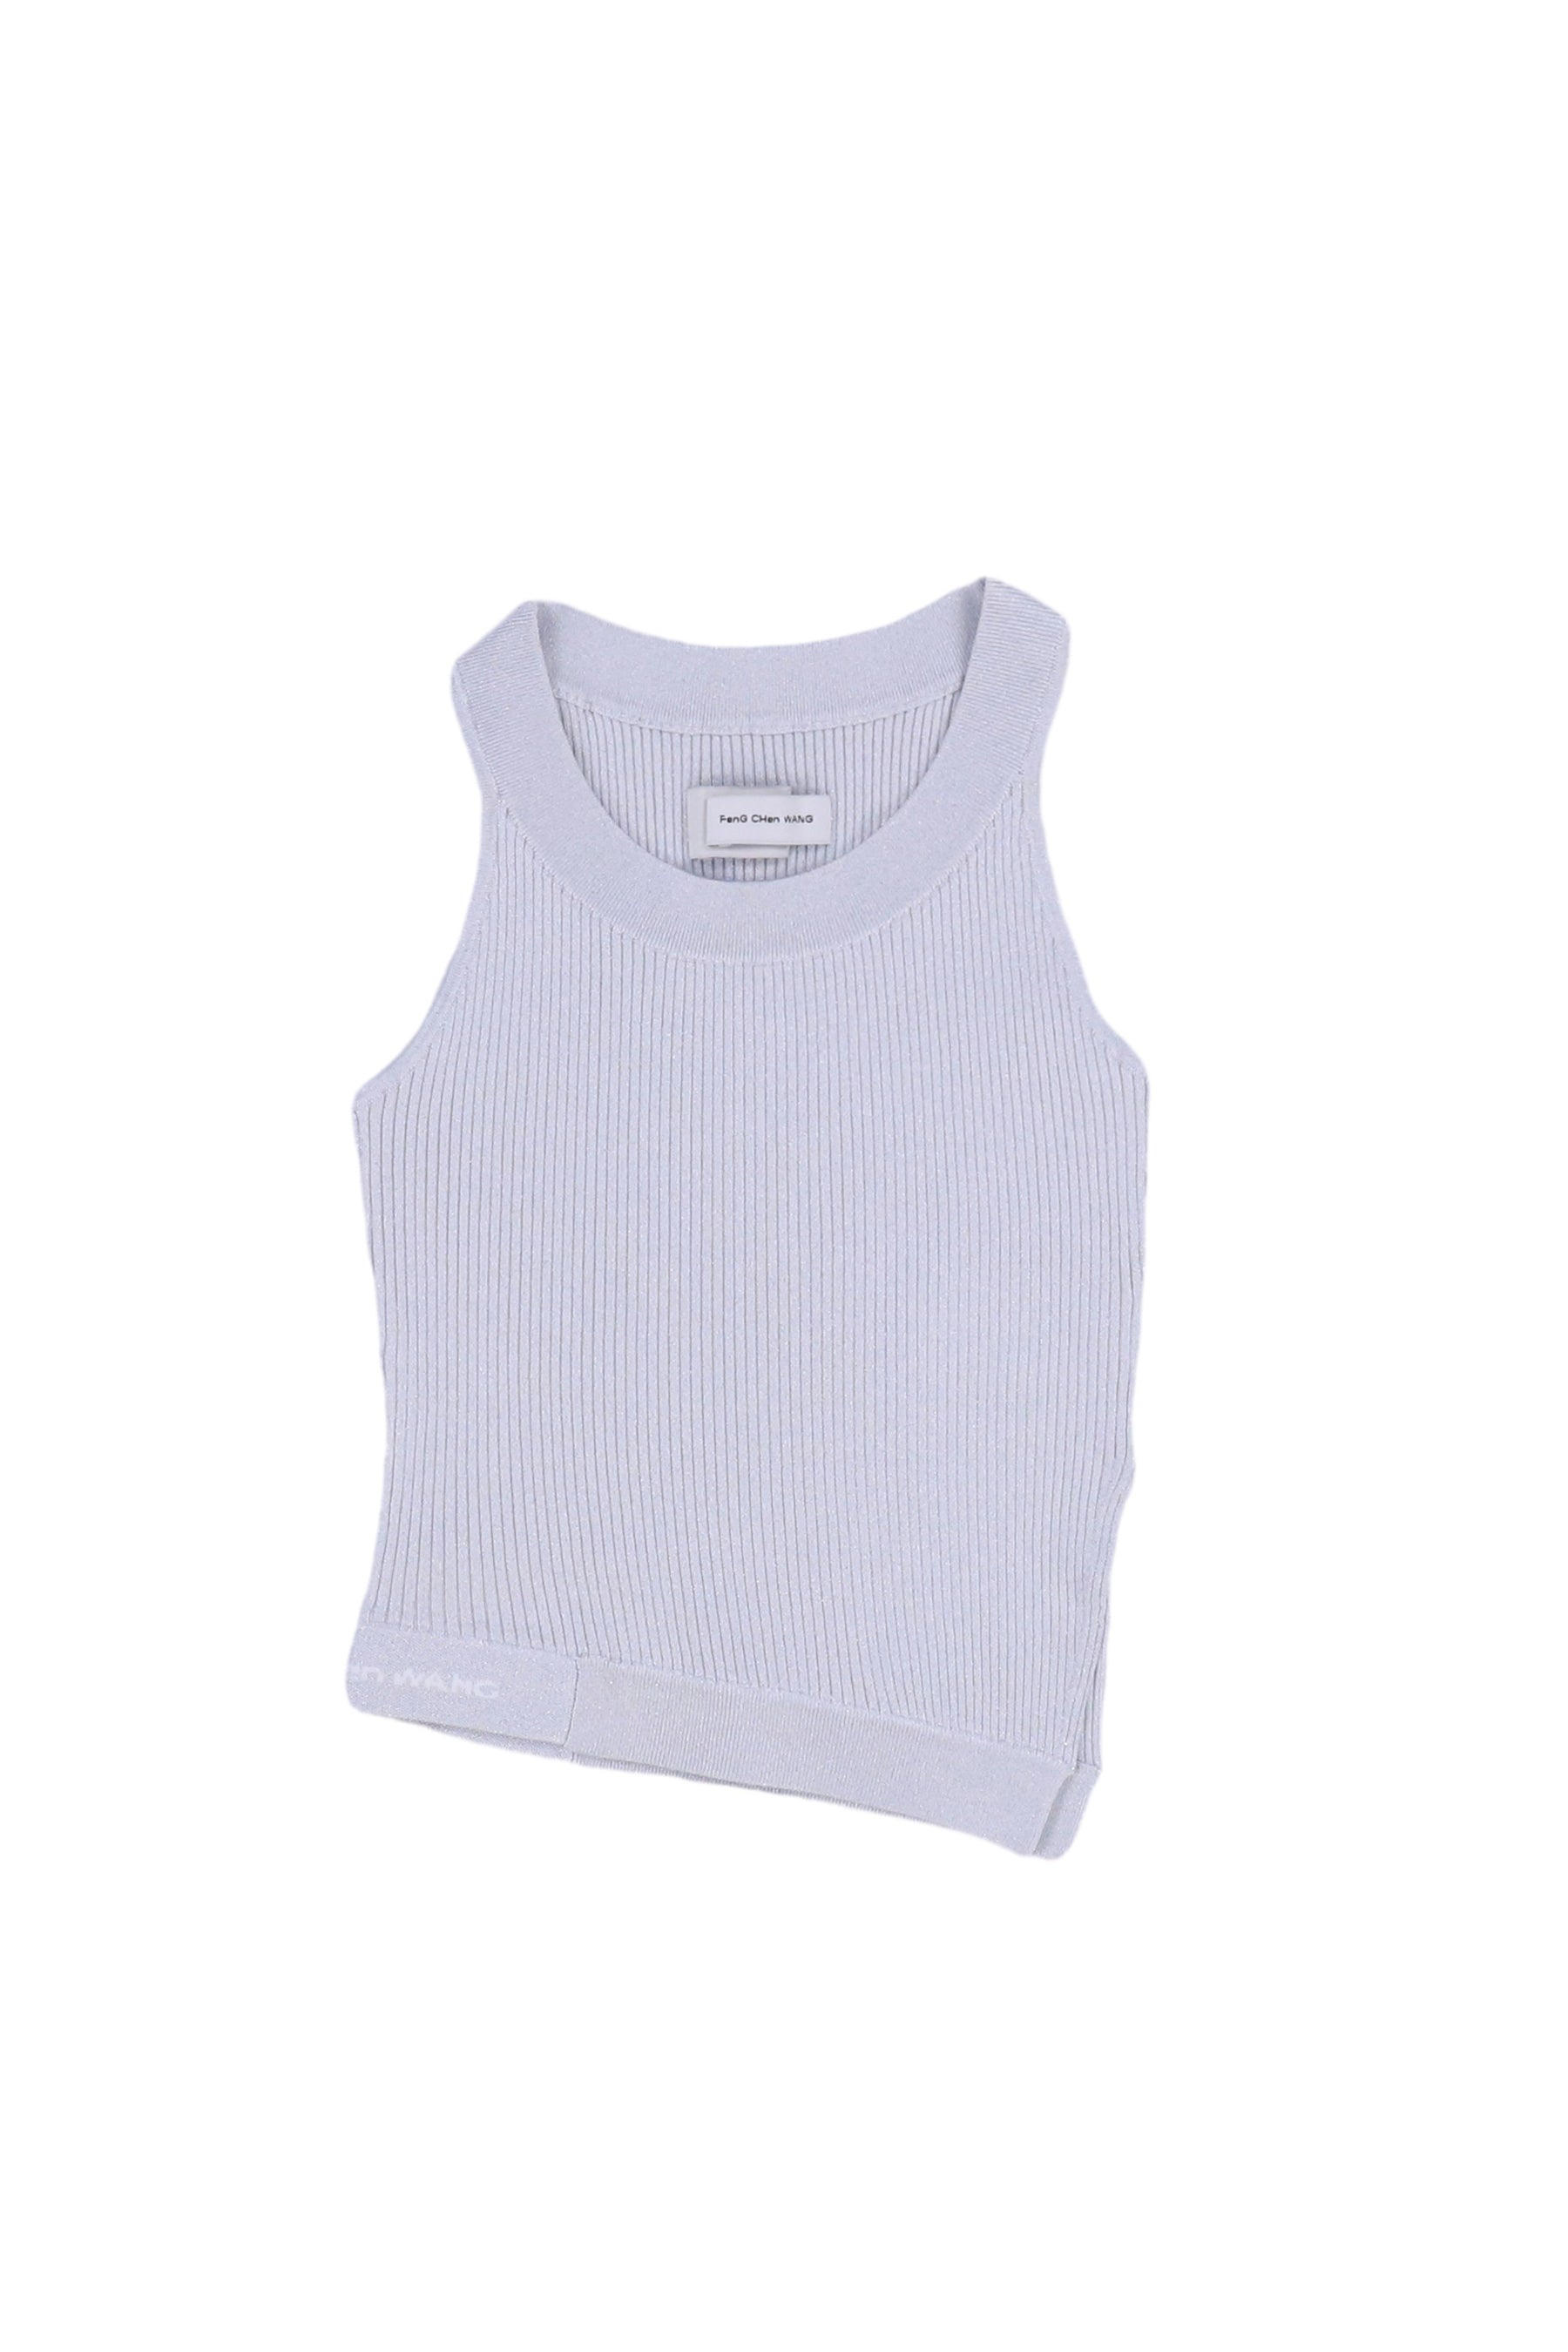 KNITTED TANK TOP / SIL - 1